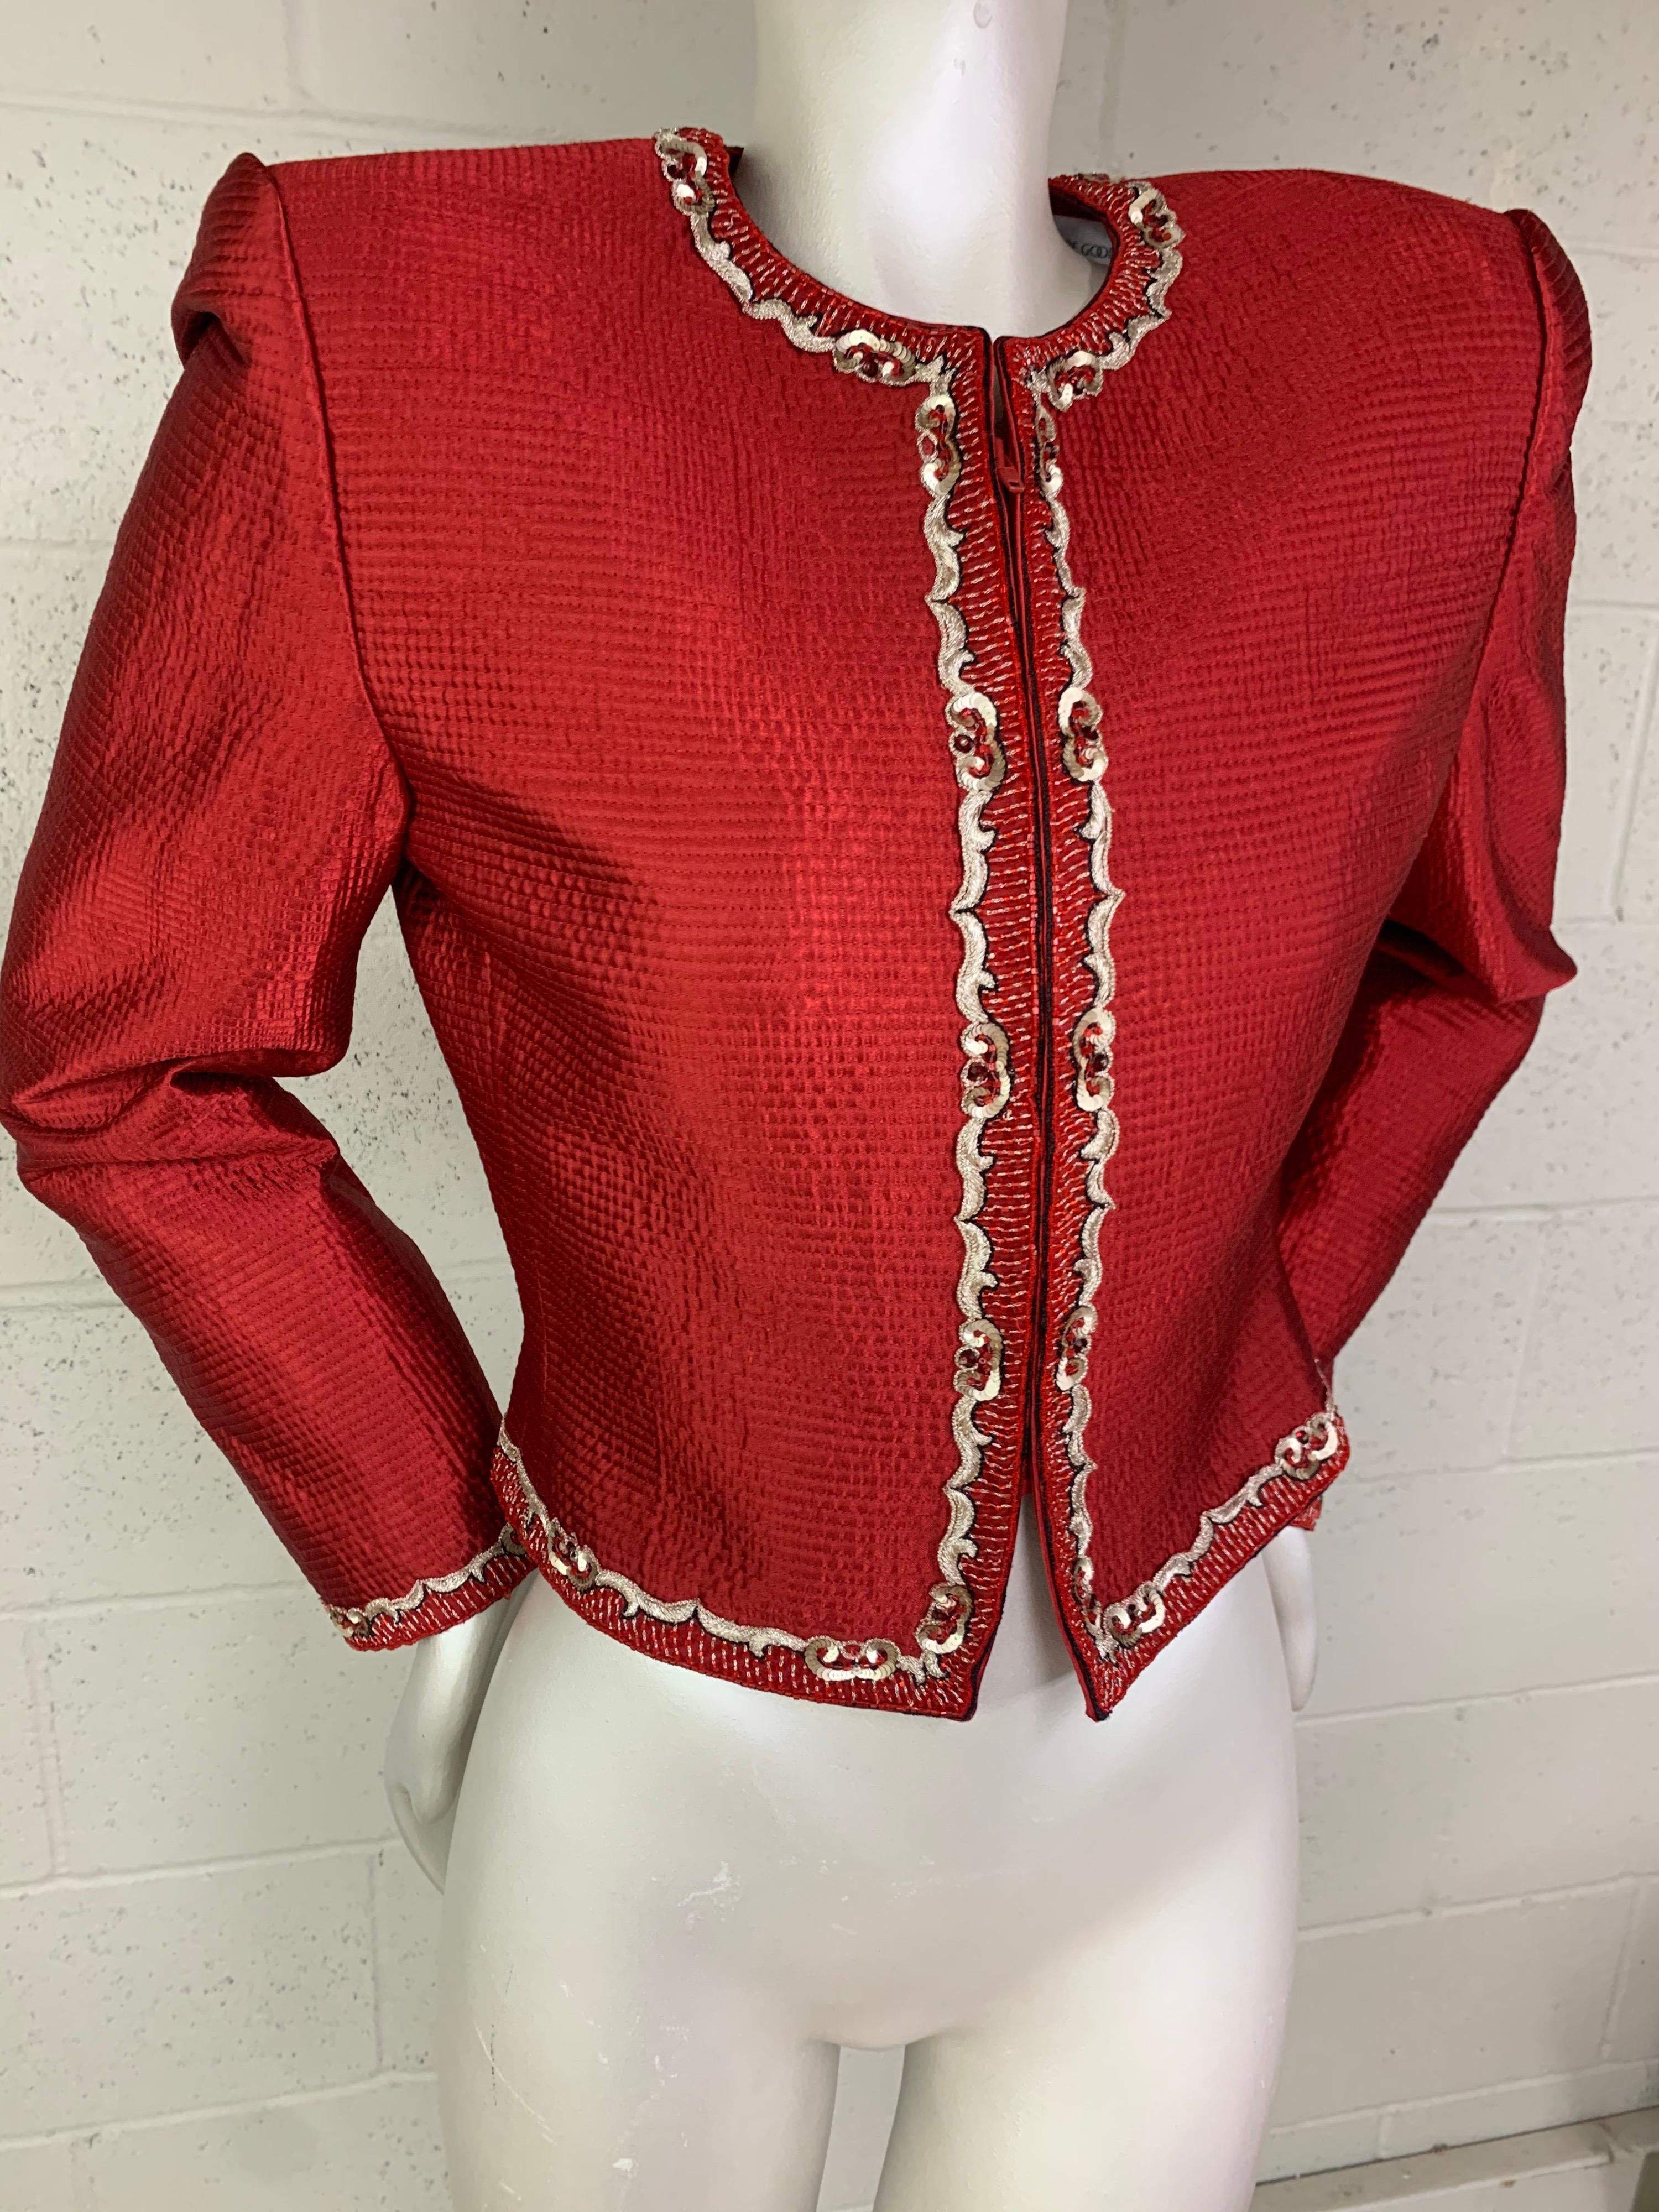 1980s Mary McFadden Red Textured Silk Zip-Front Jacket w/ Embroidery Trim 3